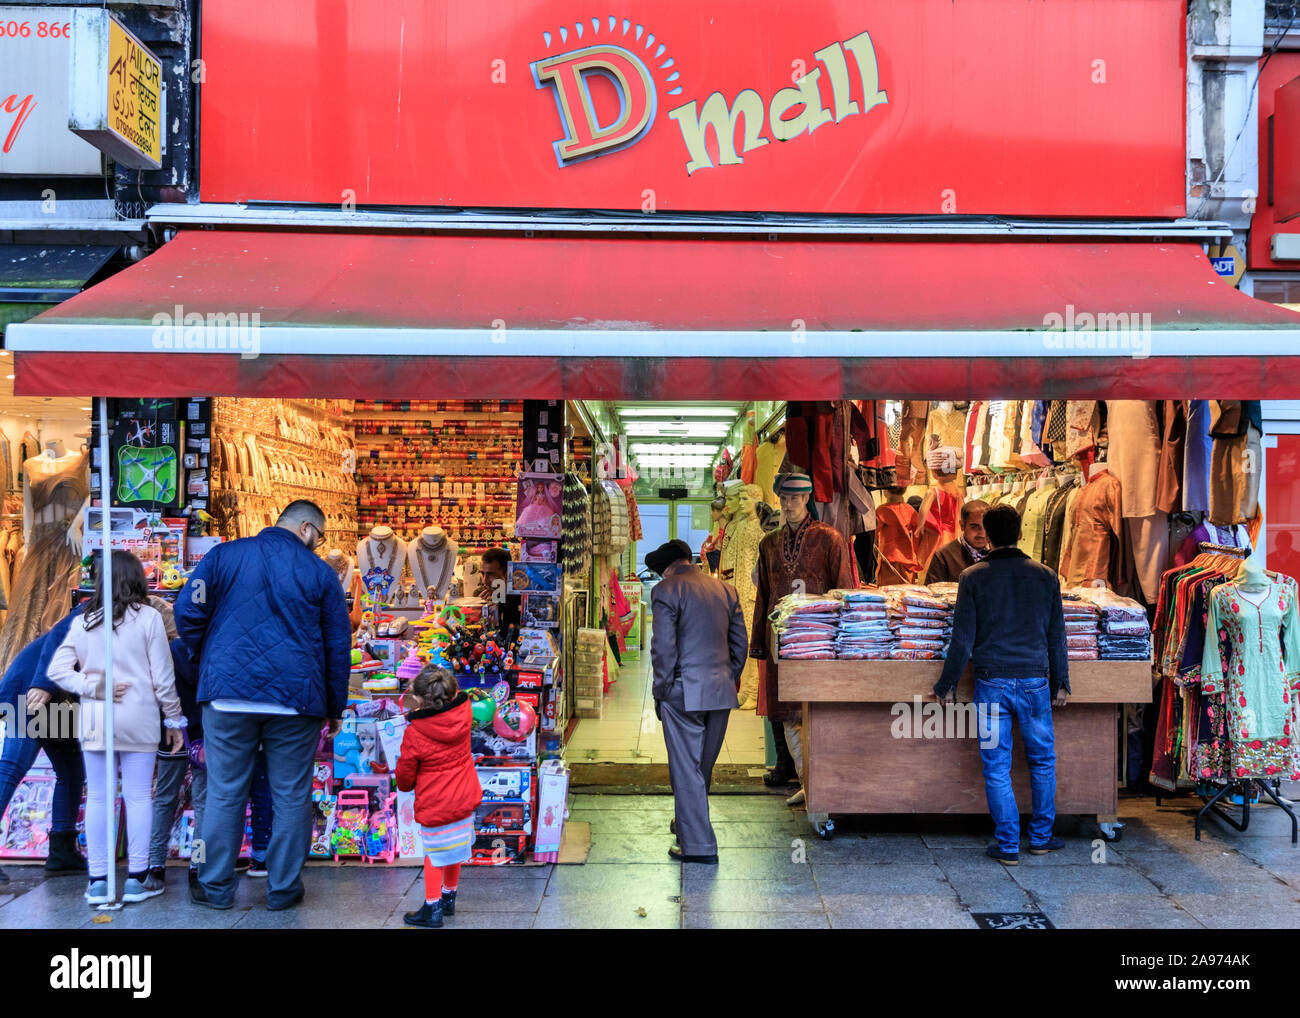 D Mall Asian clothing shops exterior view of people browsing, Southall High Street, London, UK Stock Photo